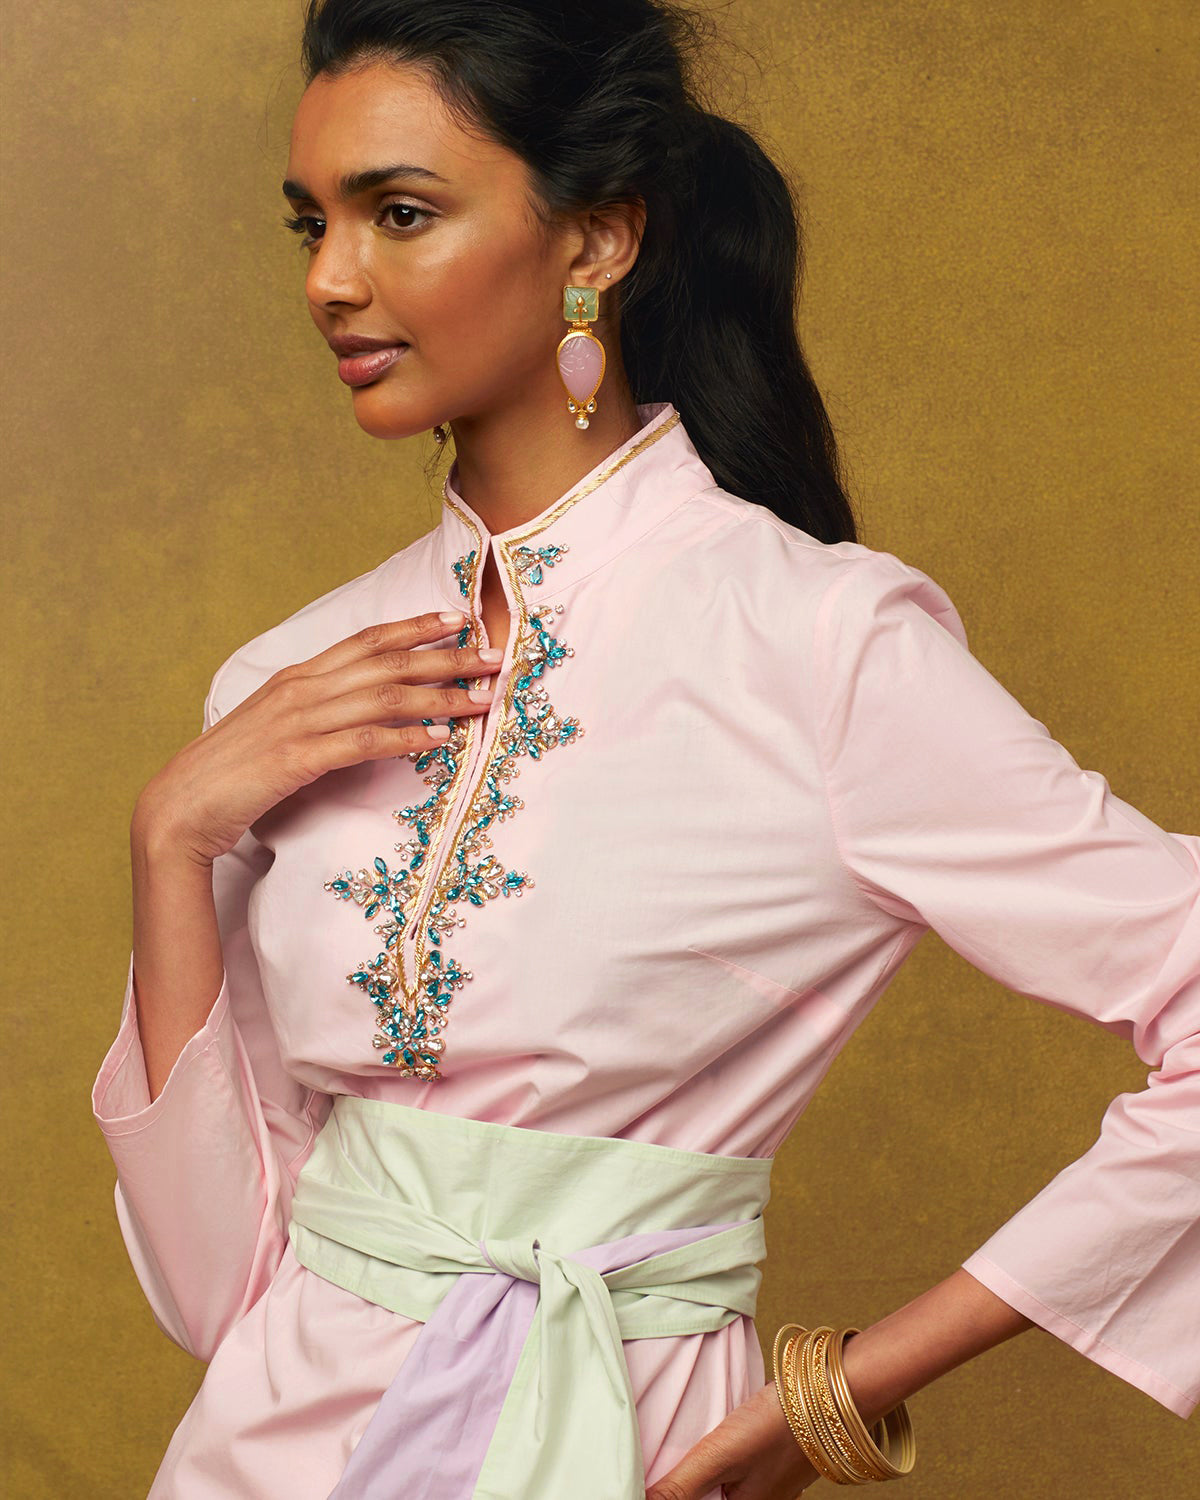 Circe Tunic in Blush Pink with Crystals and Gold Embroidery-Portrait with Sash Belt